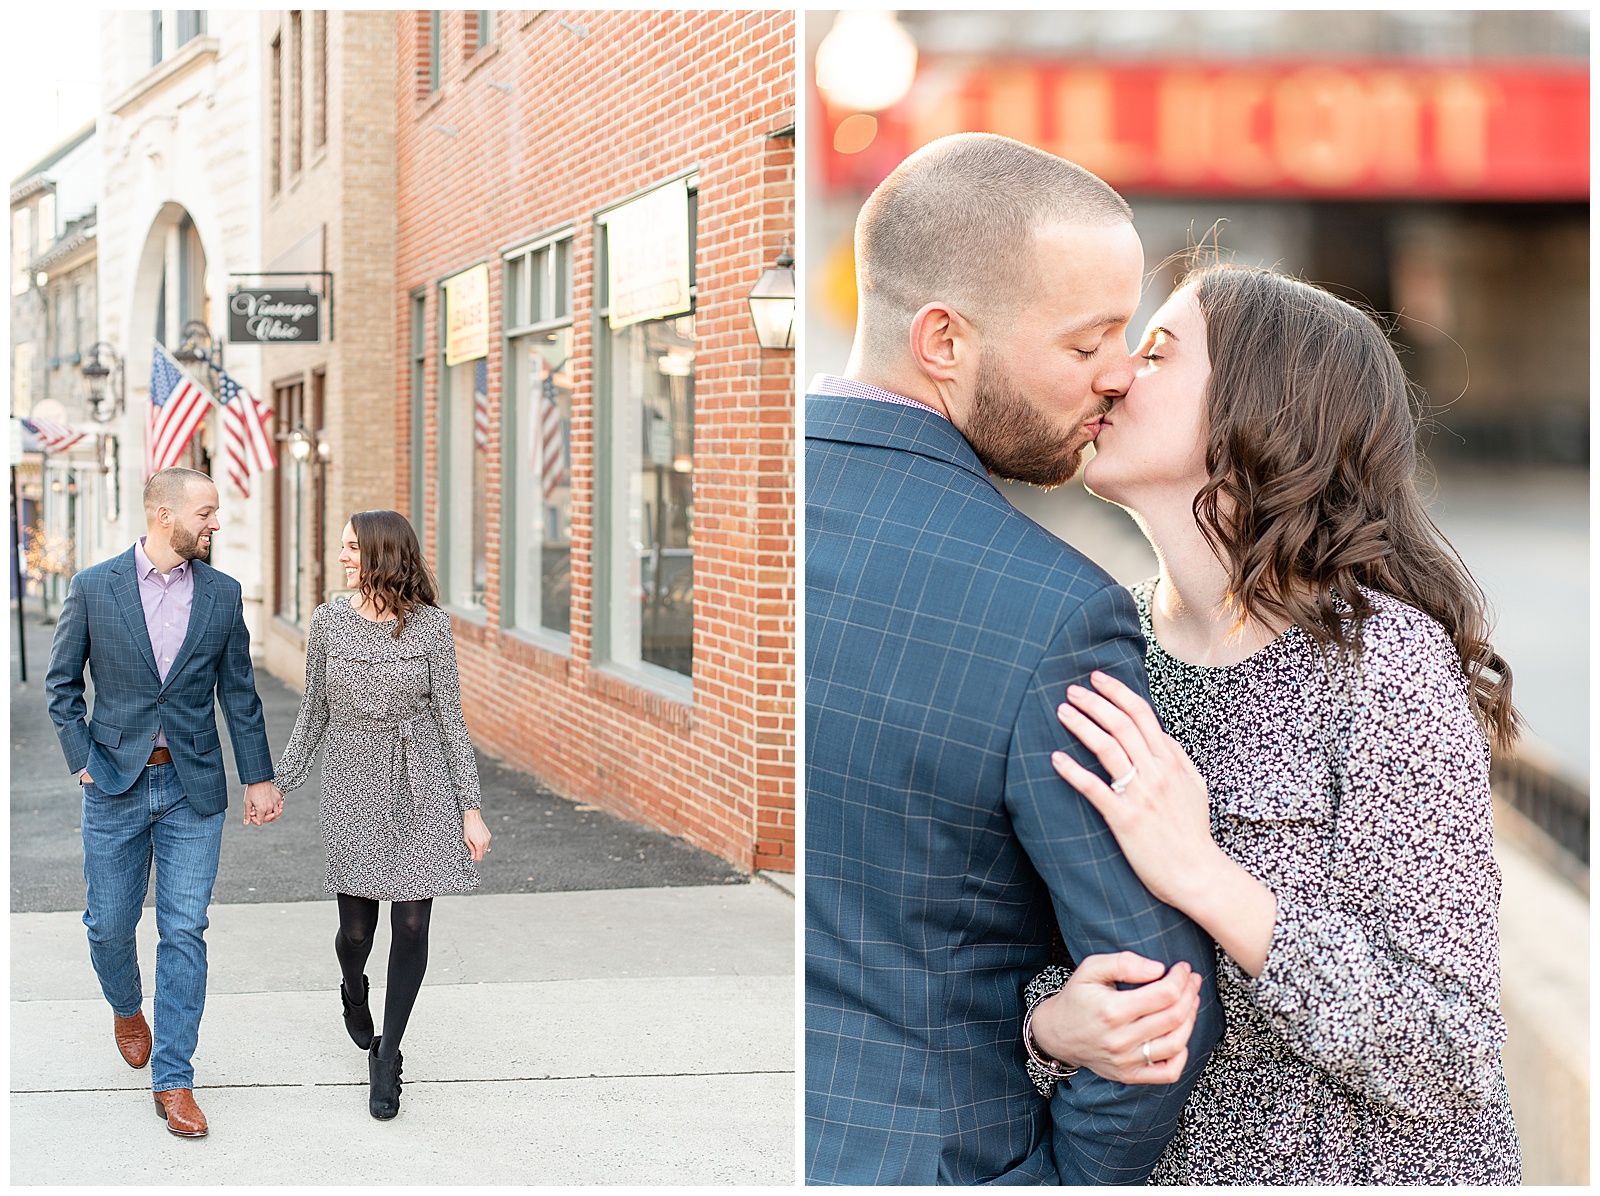 Engagement Session in Ellicott City walking through the streets